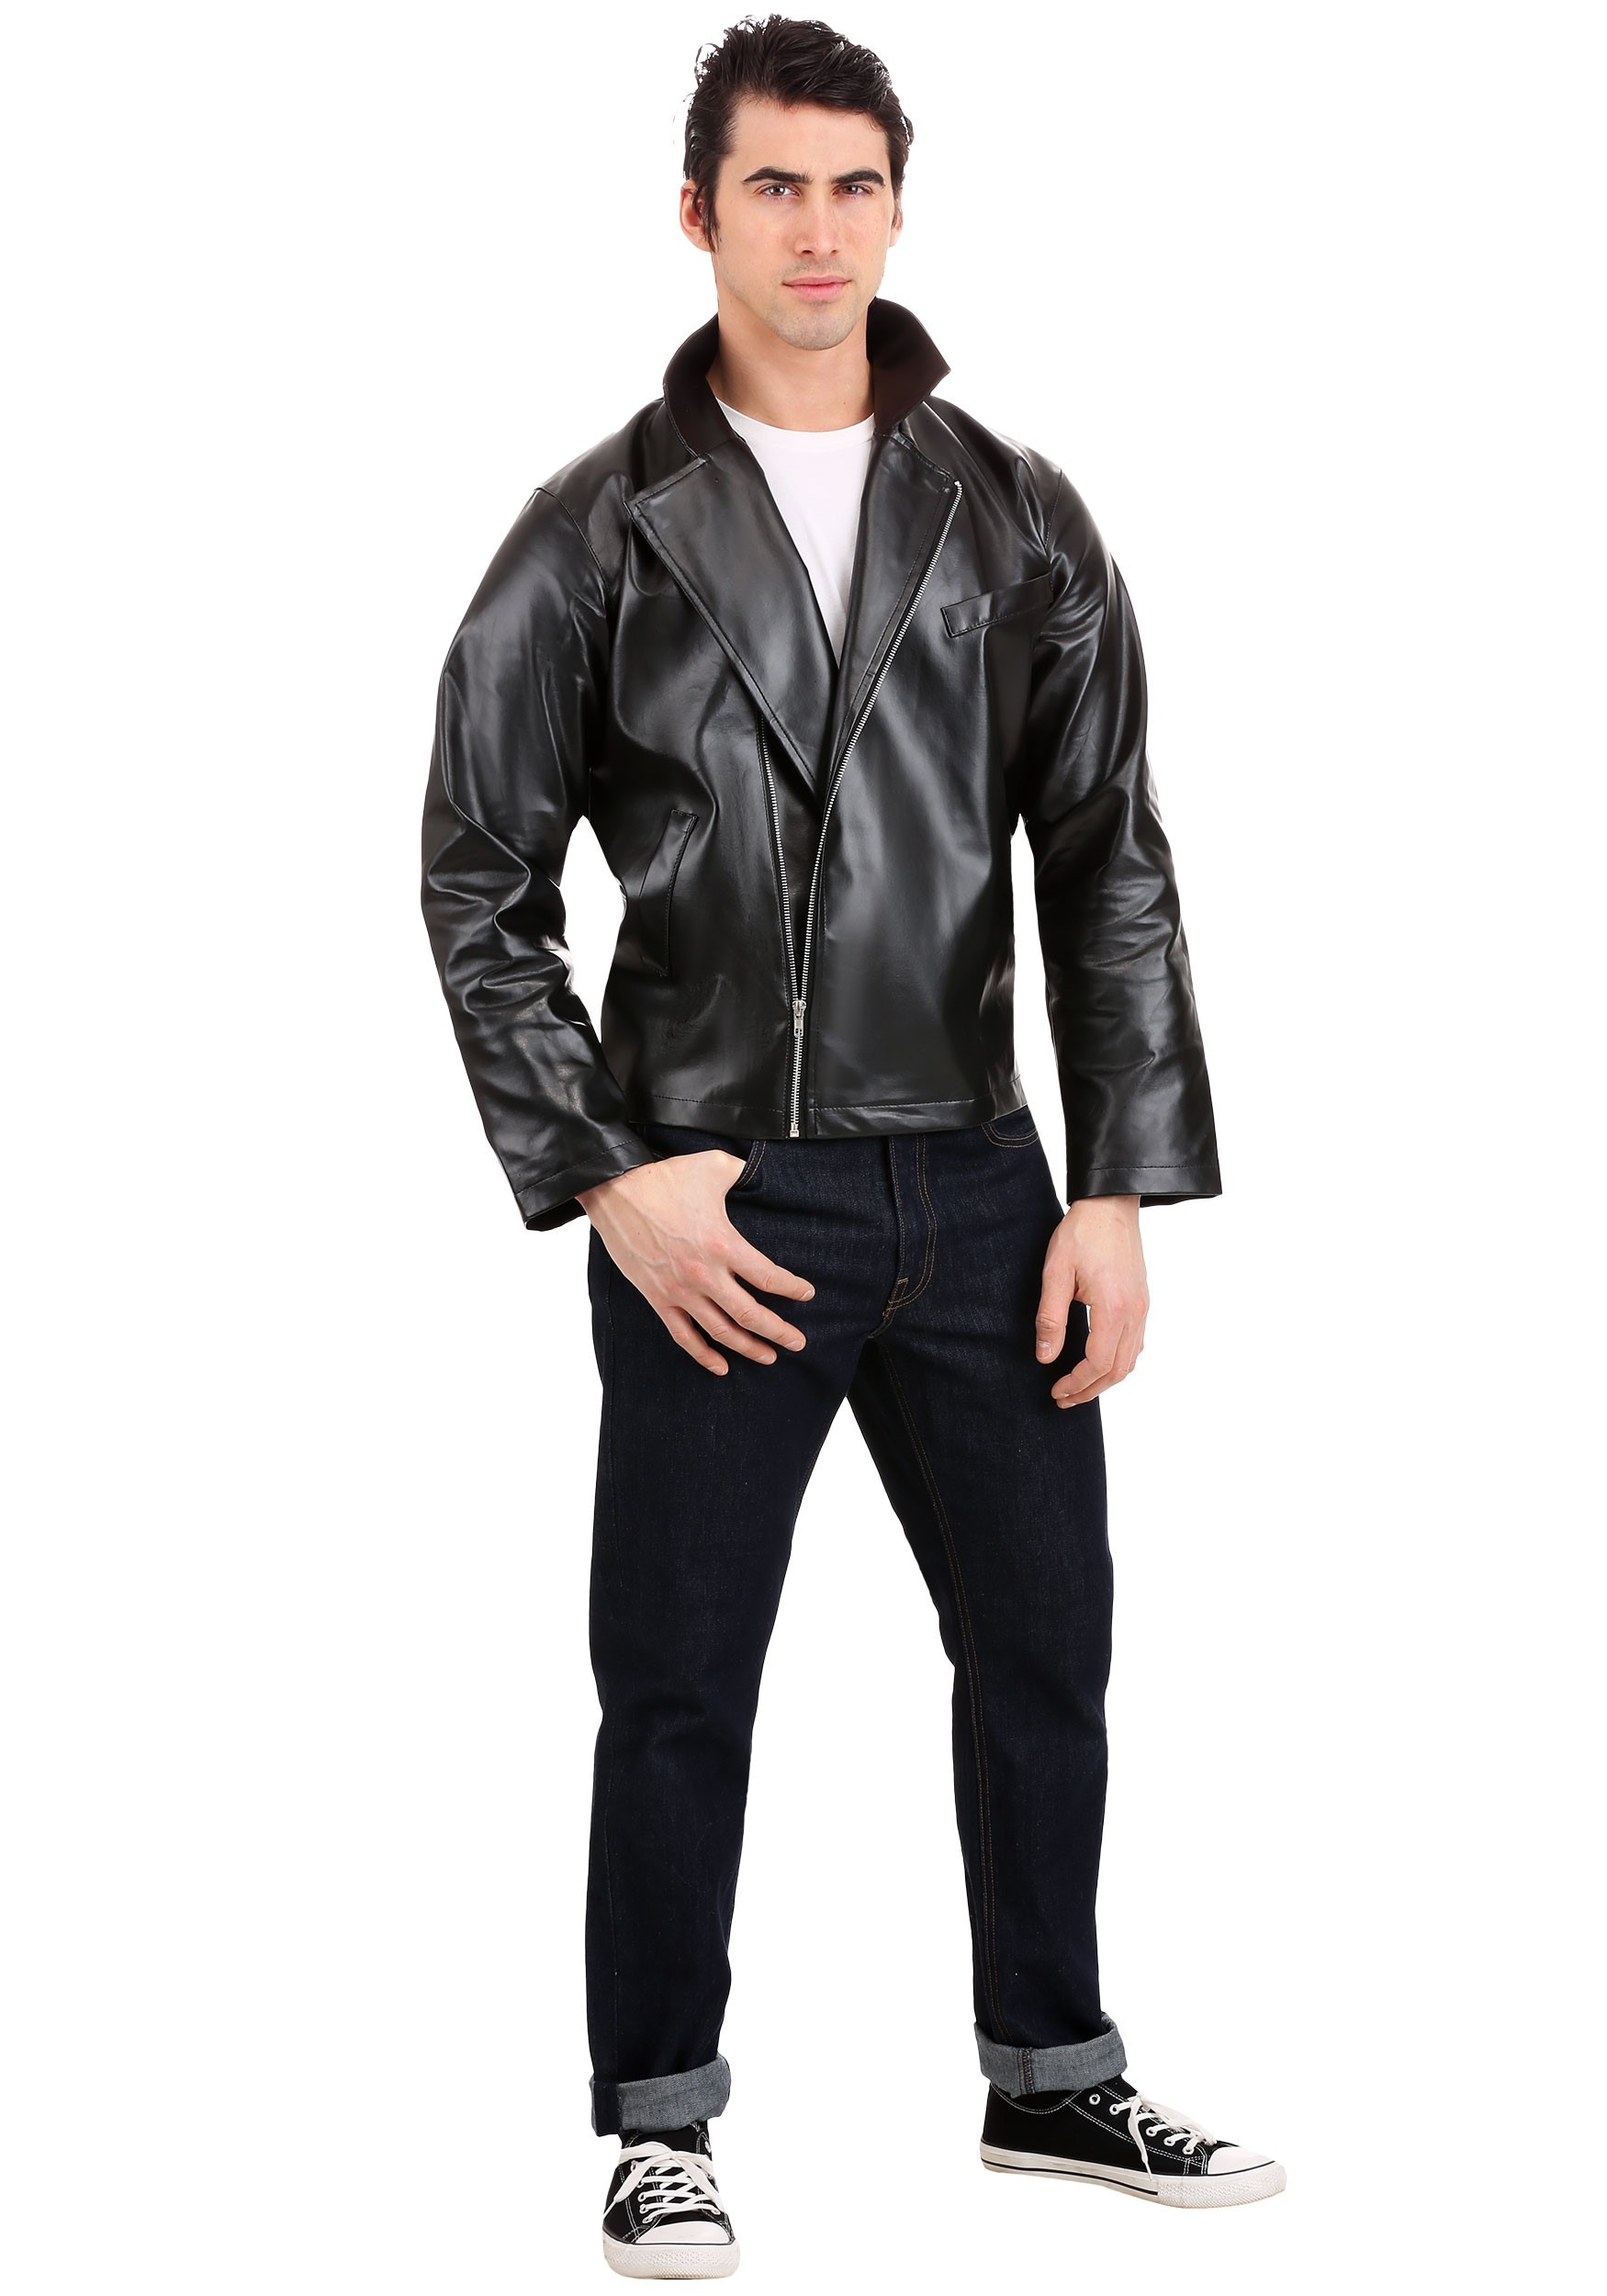 Image of Grease T-Birds Jacket Costume for Men ID GRE6007AD-XS